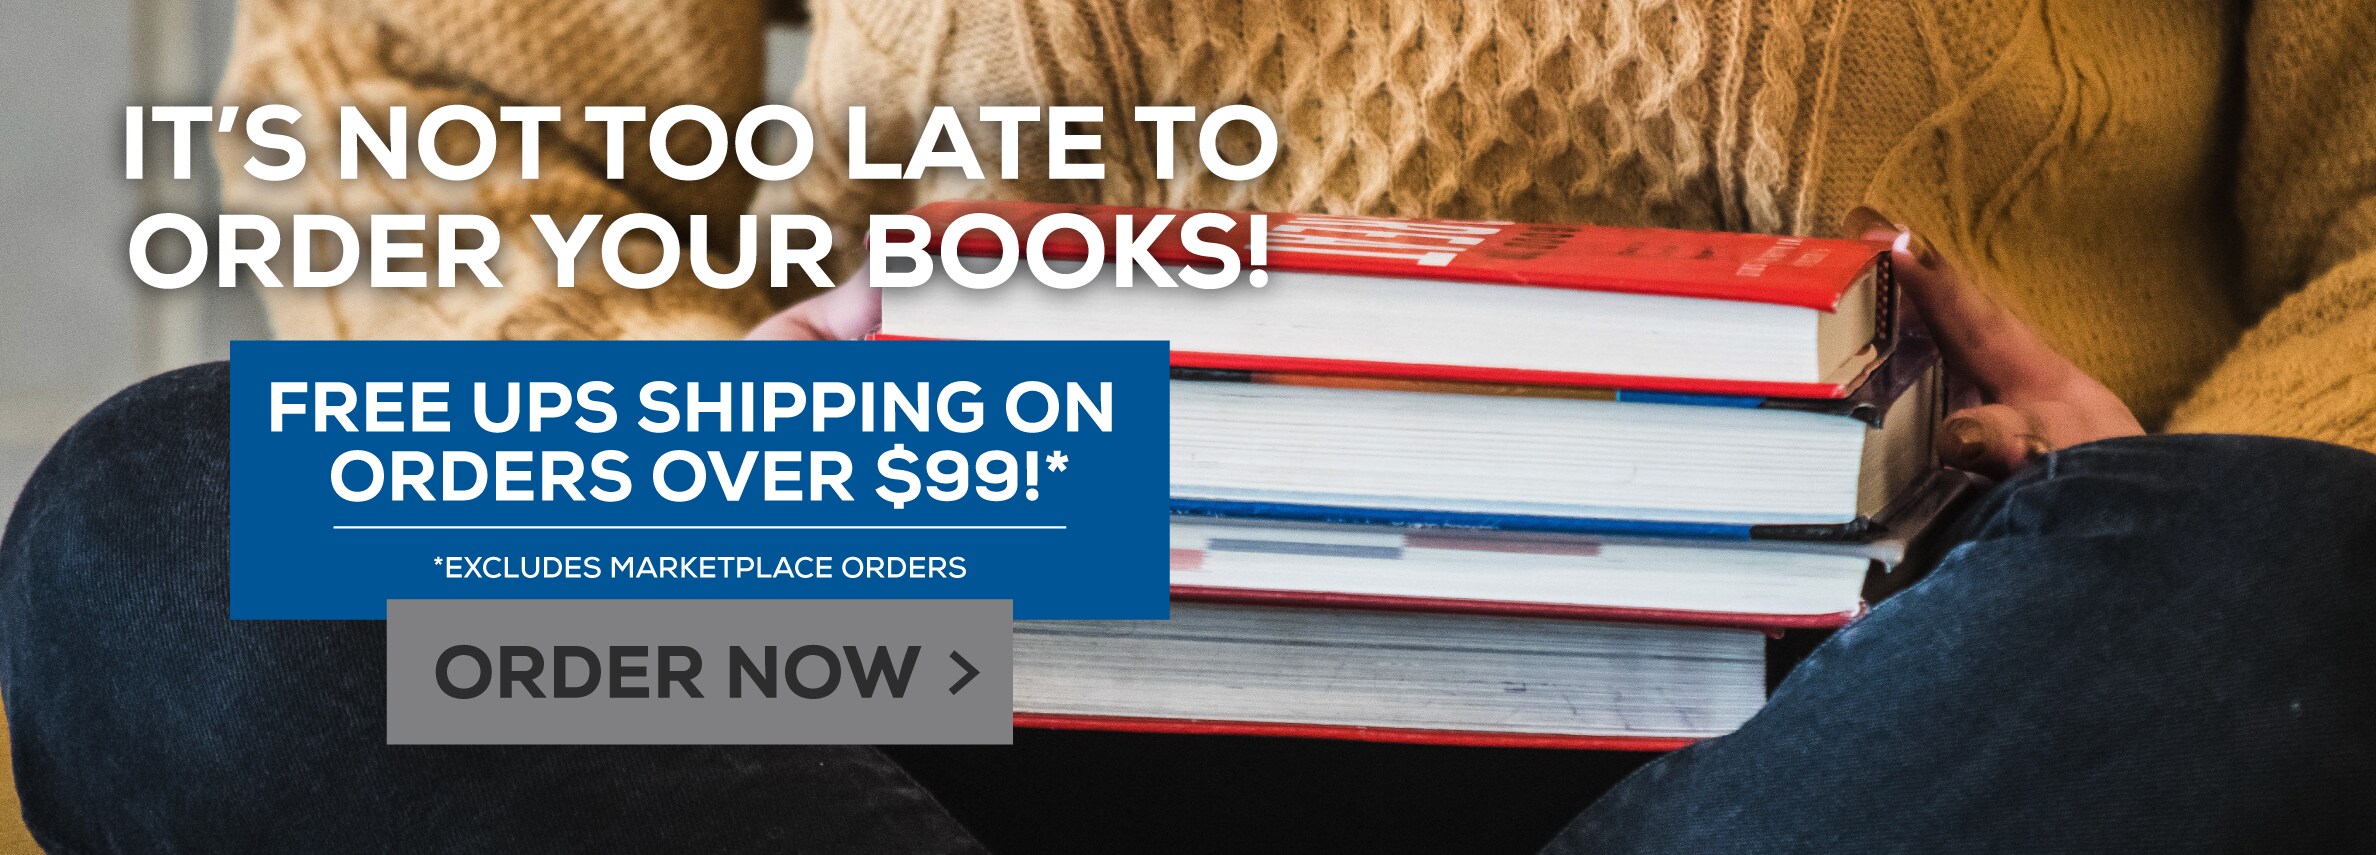 ItÃ¢â‚¬â„¢s not too late to order your books! Free economy shipping on all orders over $35 or $7 upgrade to standard shipping *Excludes marketplace purchases. Order Now.